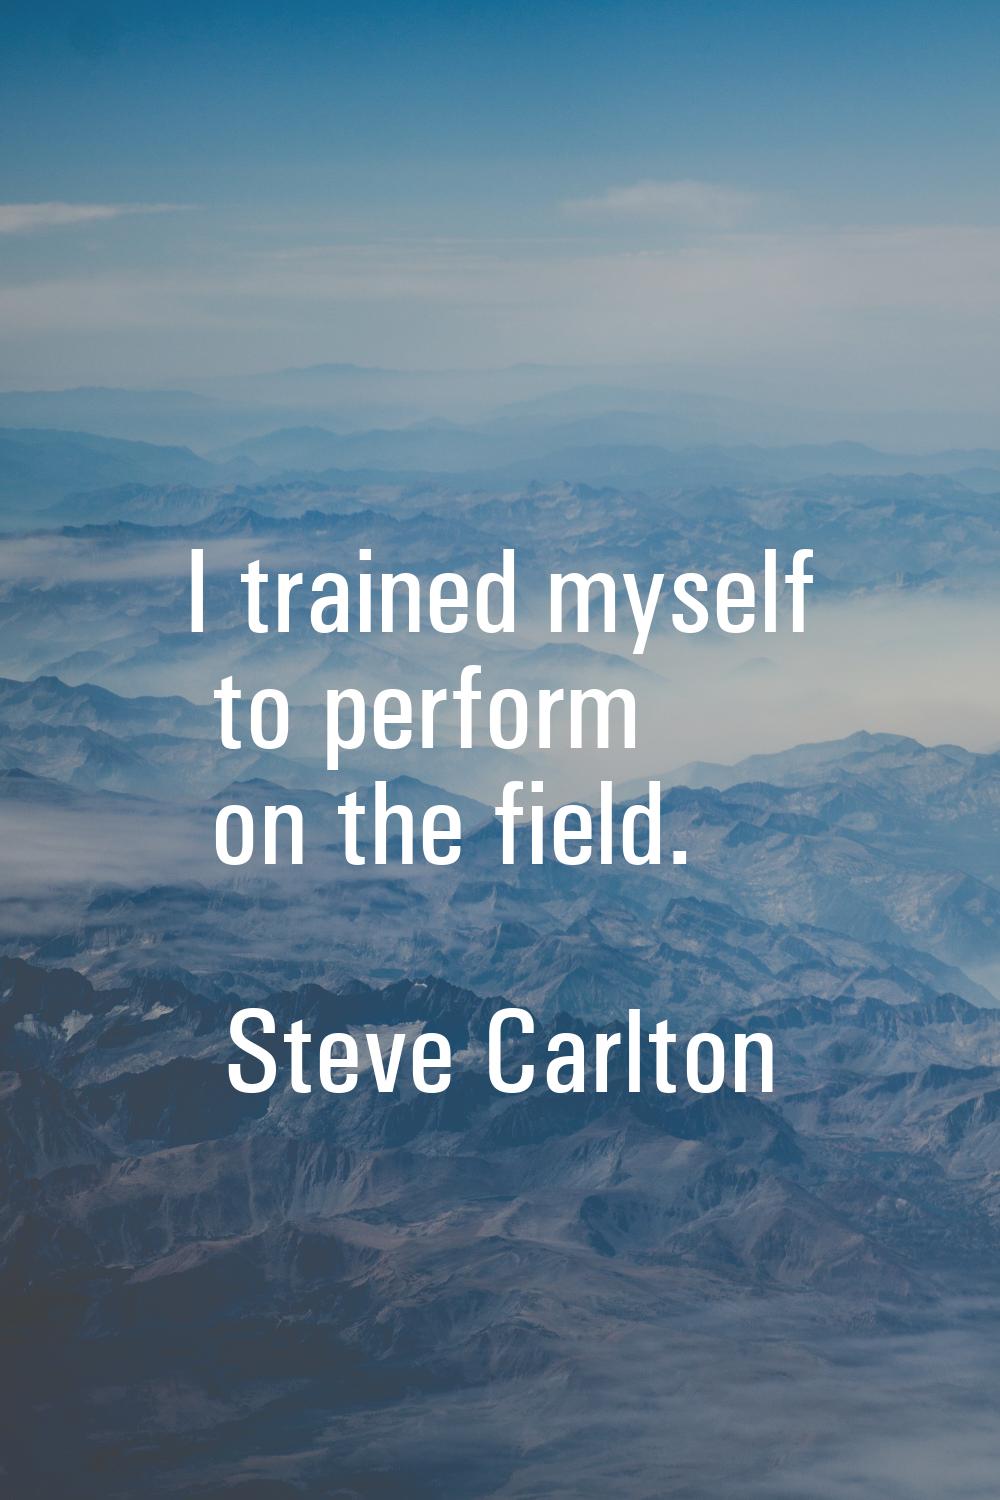 I trained myself to perform on the field.